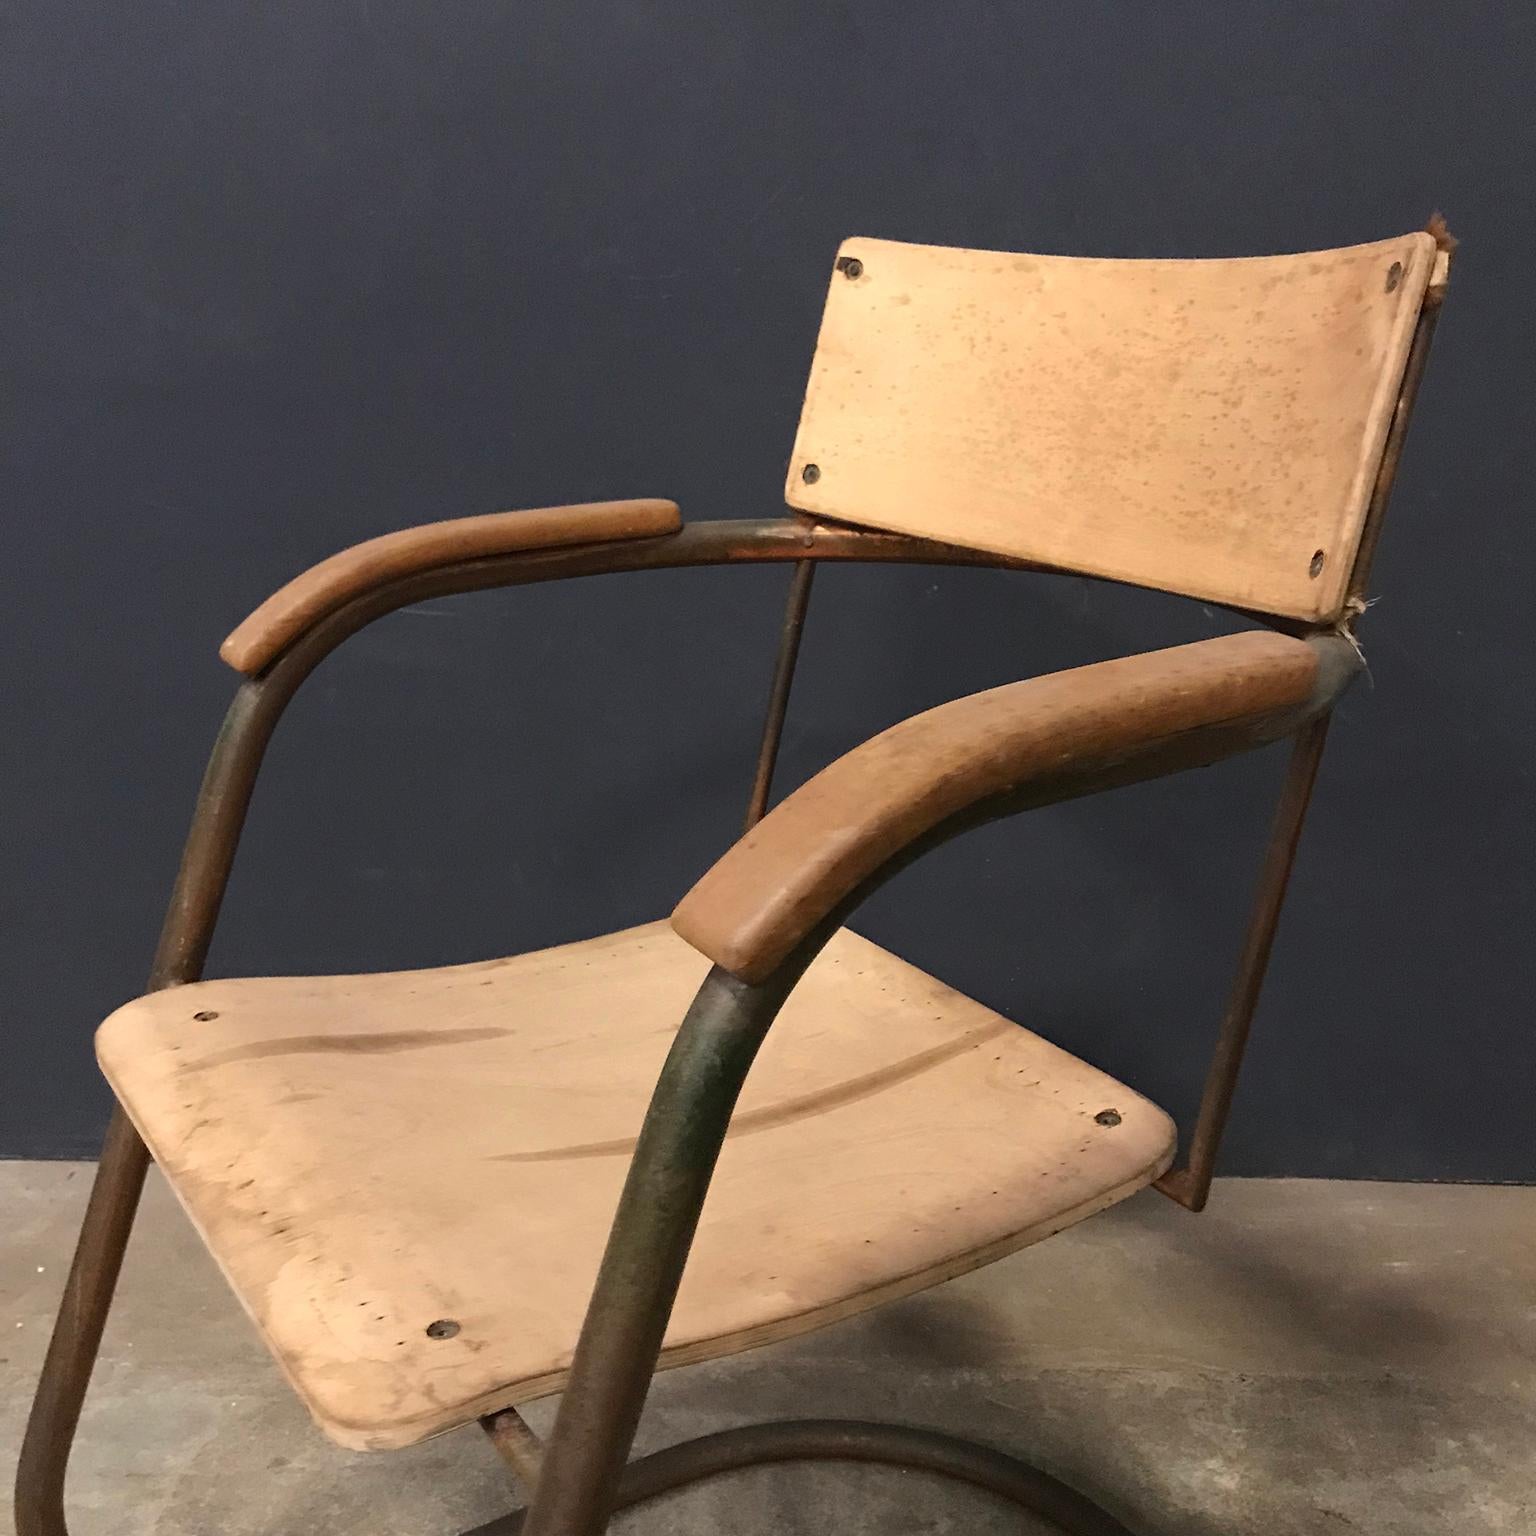 Paul Schuitema Tube Chair, Original in Copper and Upholstered Wood, circa 1930 For Sale 2